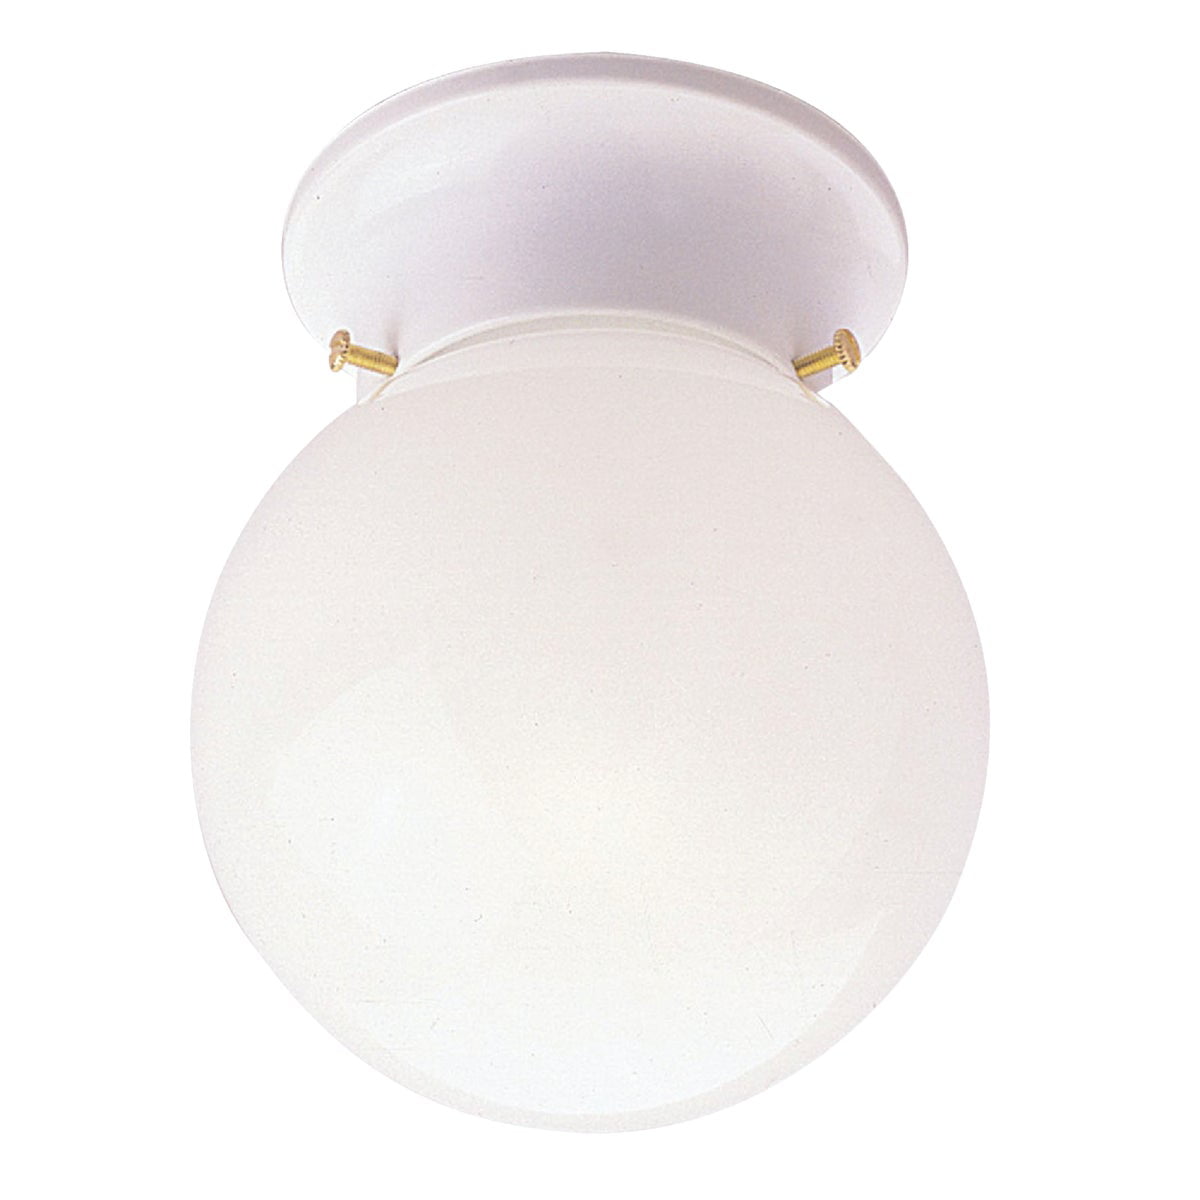 Home Impressions 6 In White Incandescent Flush Mount Ceiling Light Fixture 